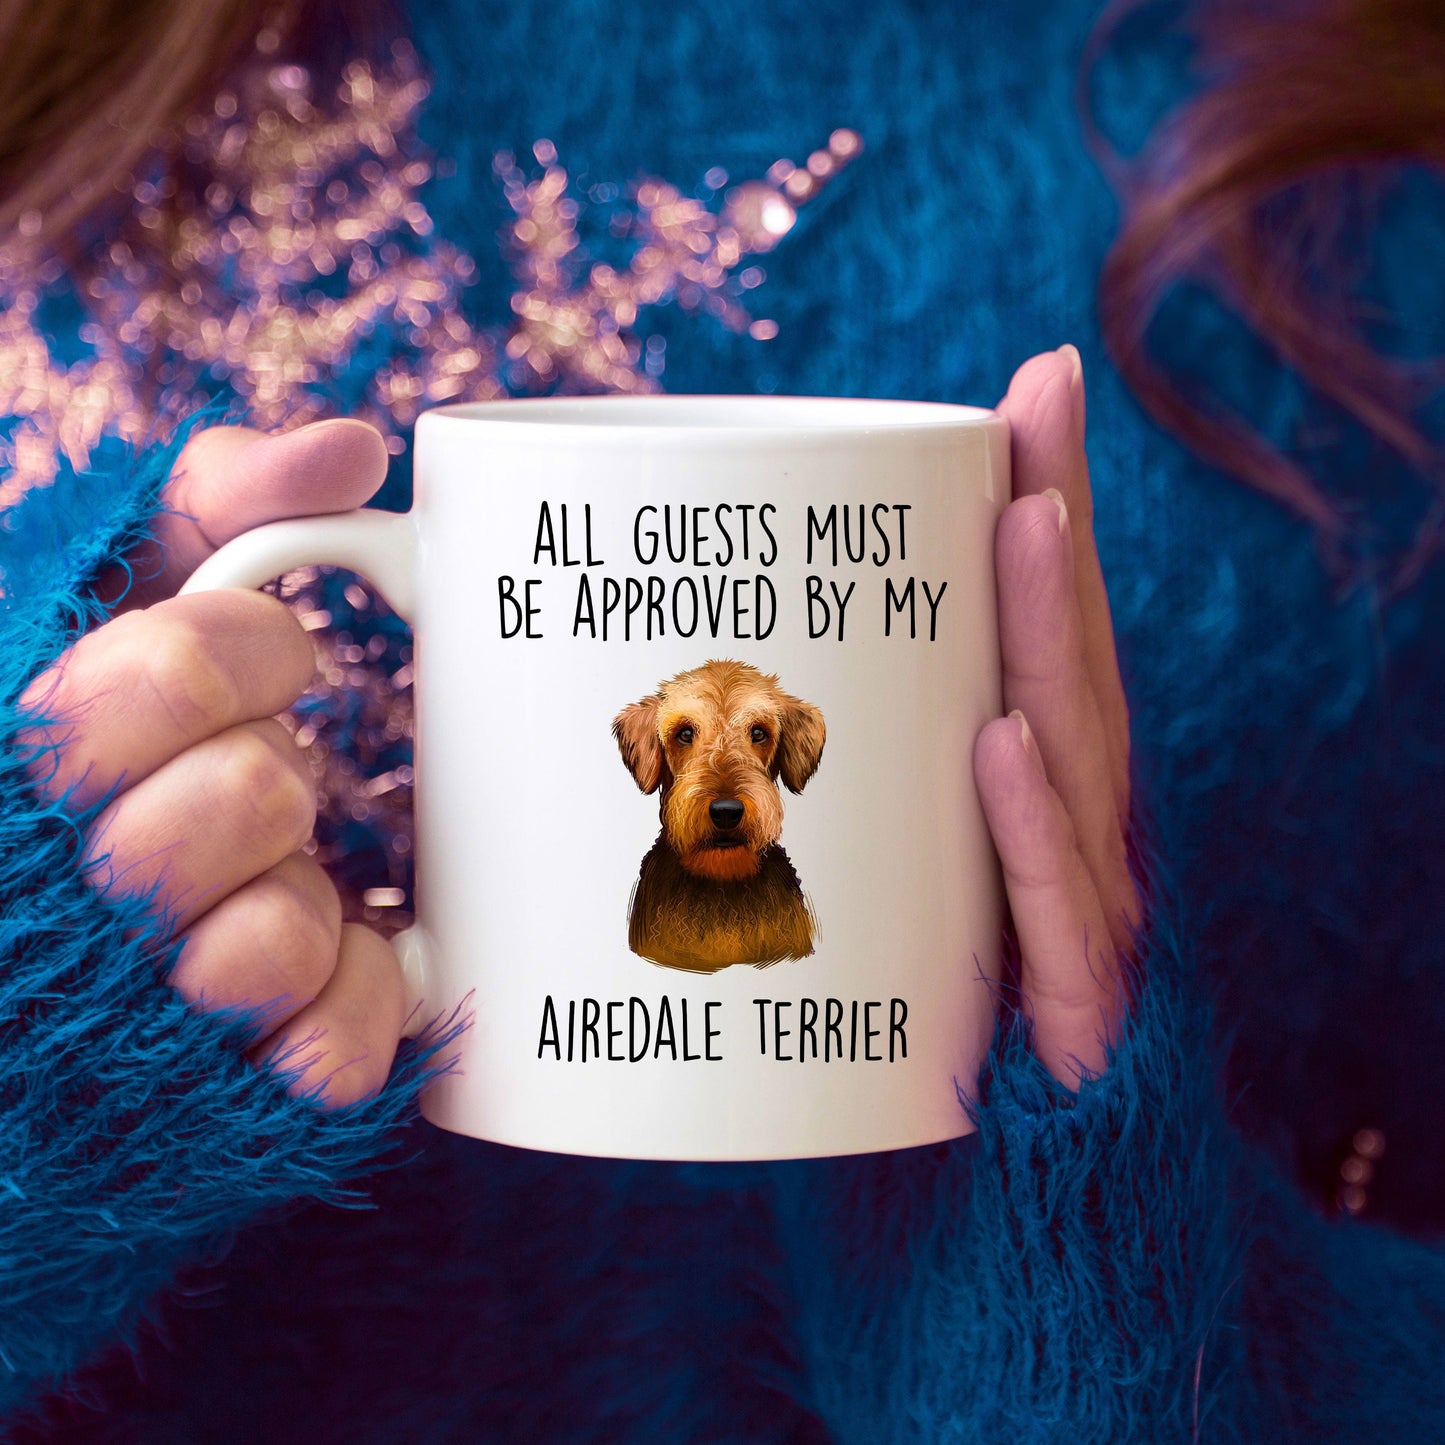 Funny Dog Ceramic Coffee Mug - All Guests Must be Approved by my Airedale Terrier